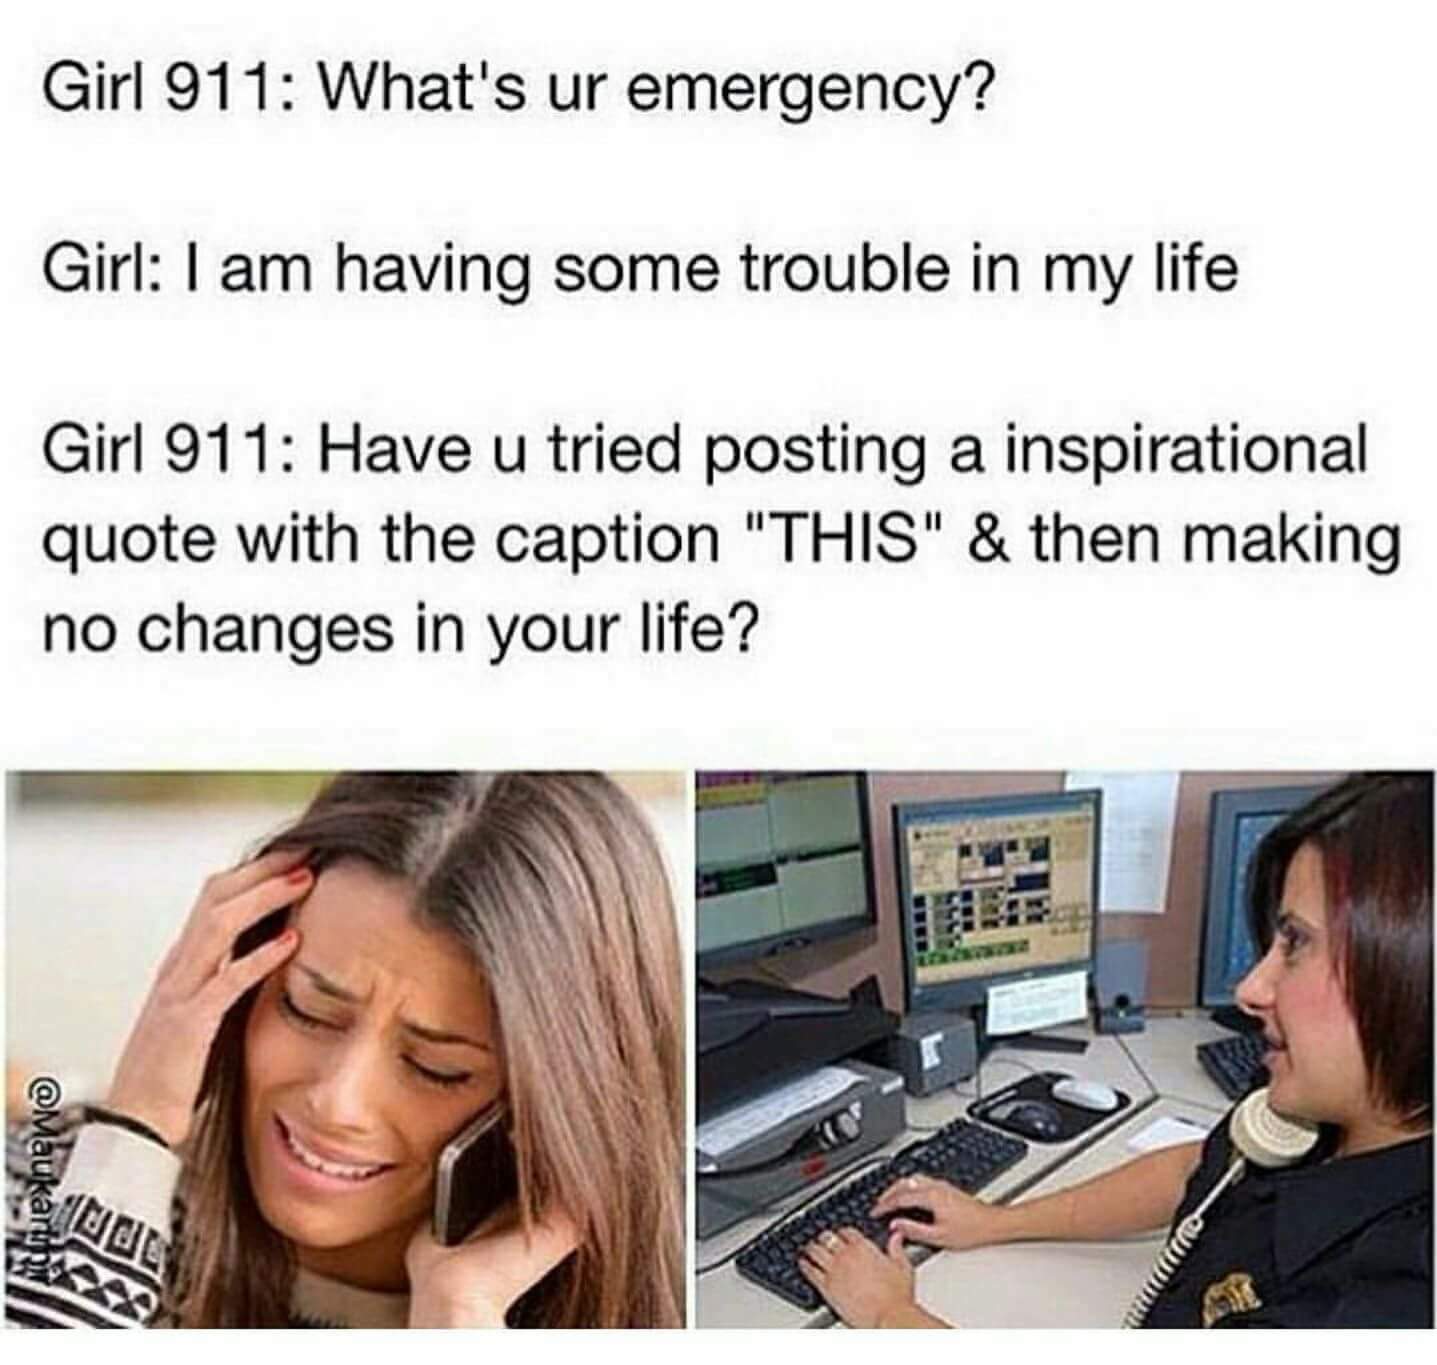 girl 911 meme - Girl 911 What's ur emergency? Girl I am having some trouble in my life Girl 911 Have u tried posting a inspirational quote with the caption "This" & then making no changes in your life?